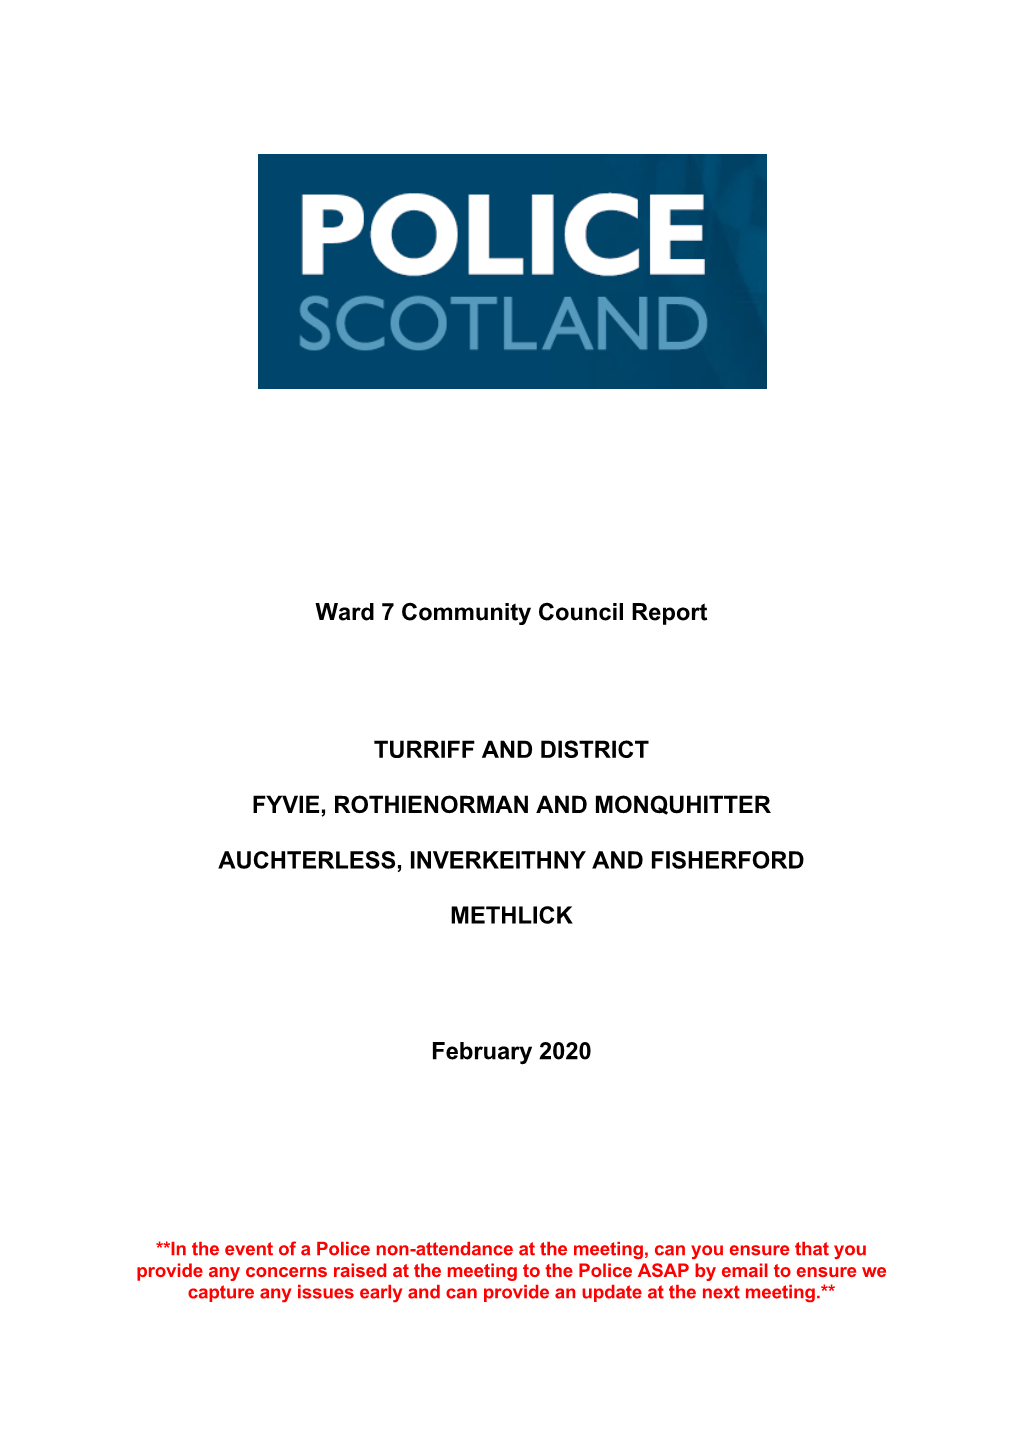 Ward 7 Community Council Report TURRIFF and DISTRICT FYVIE